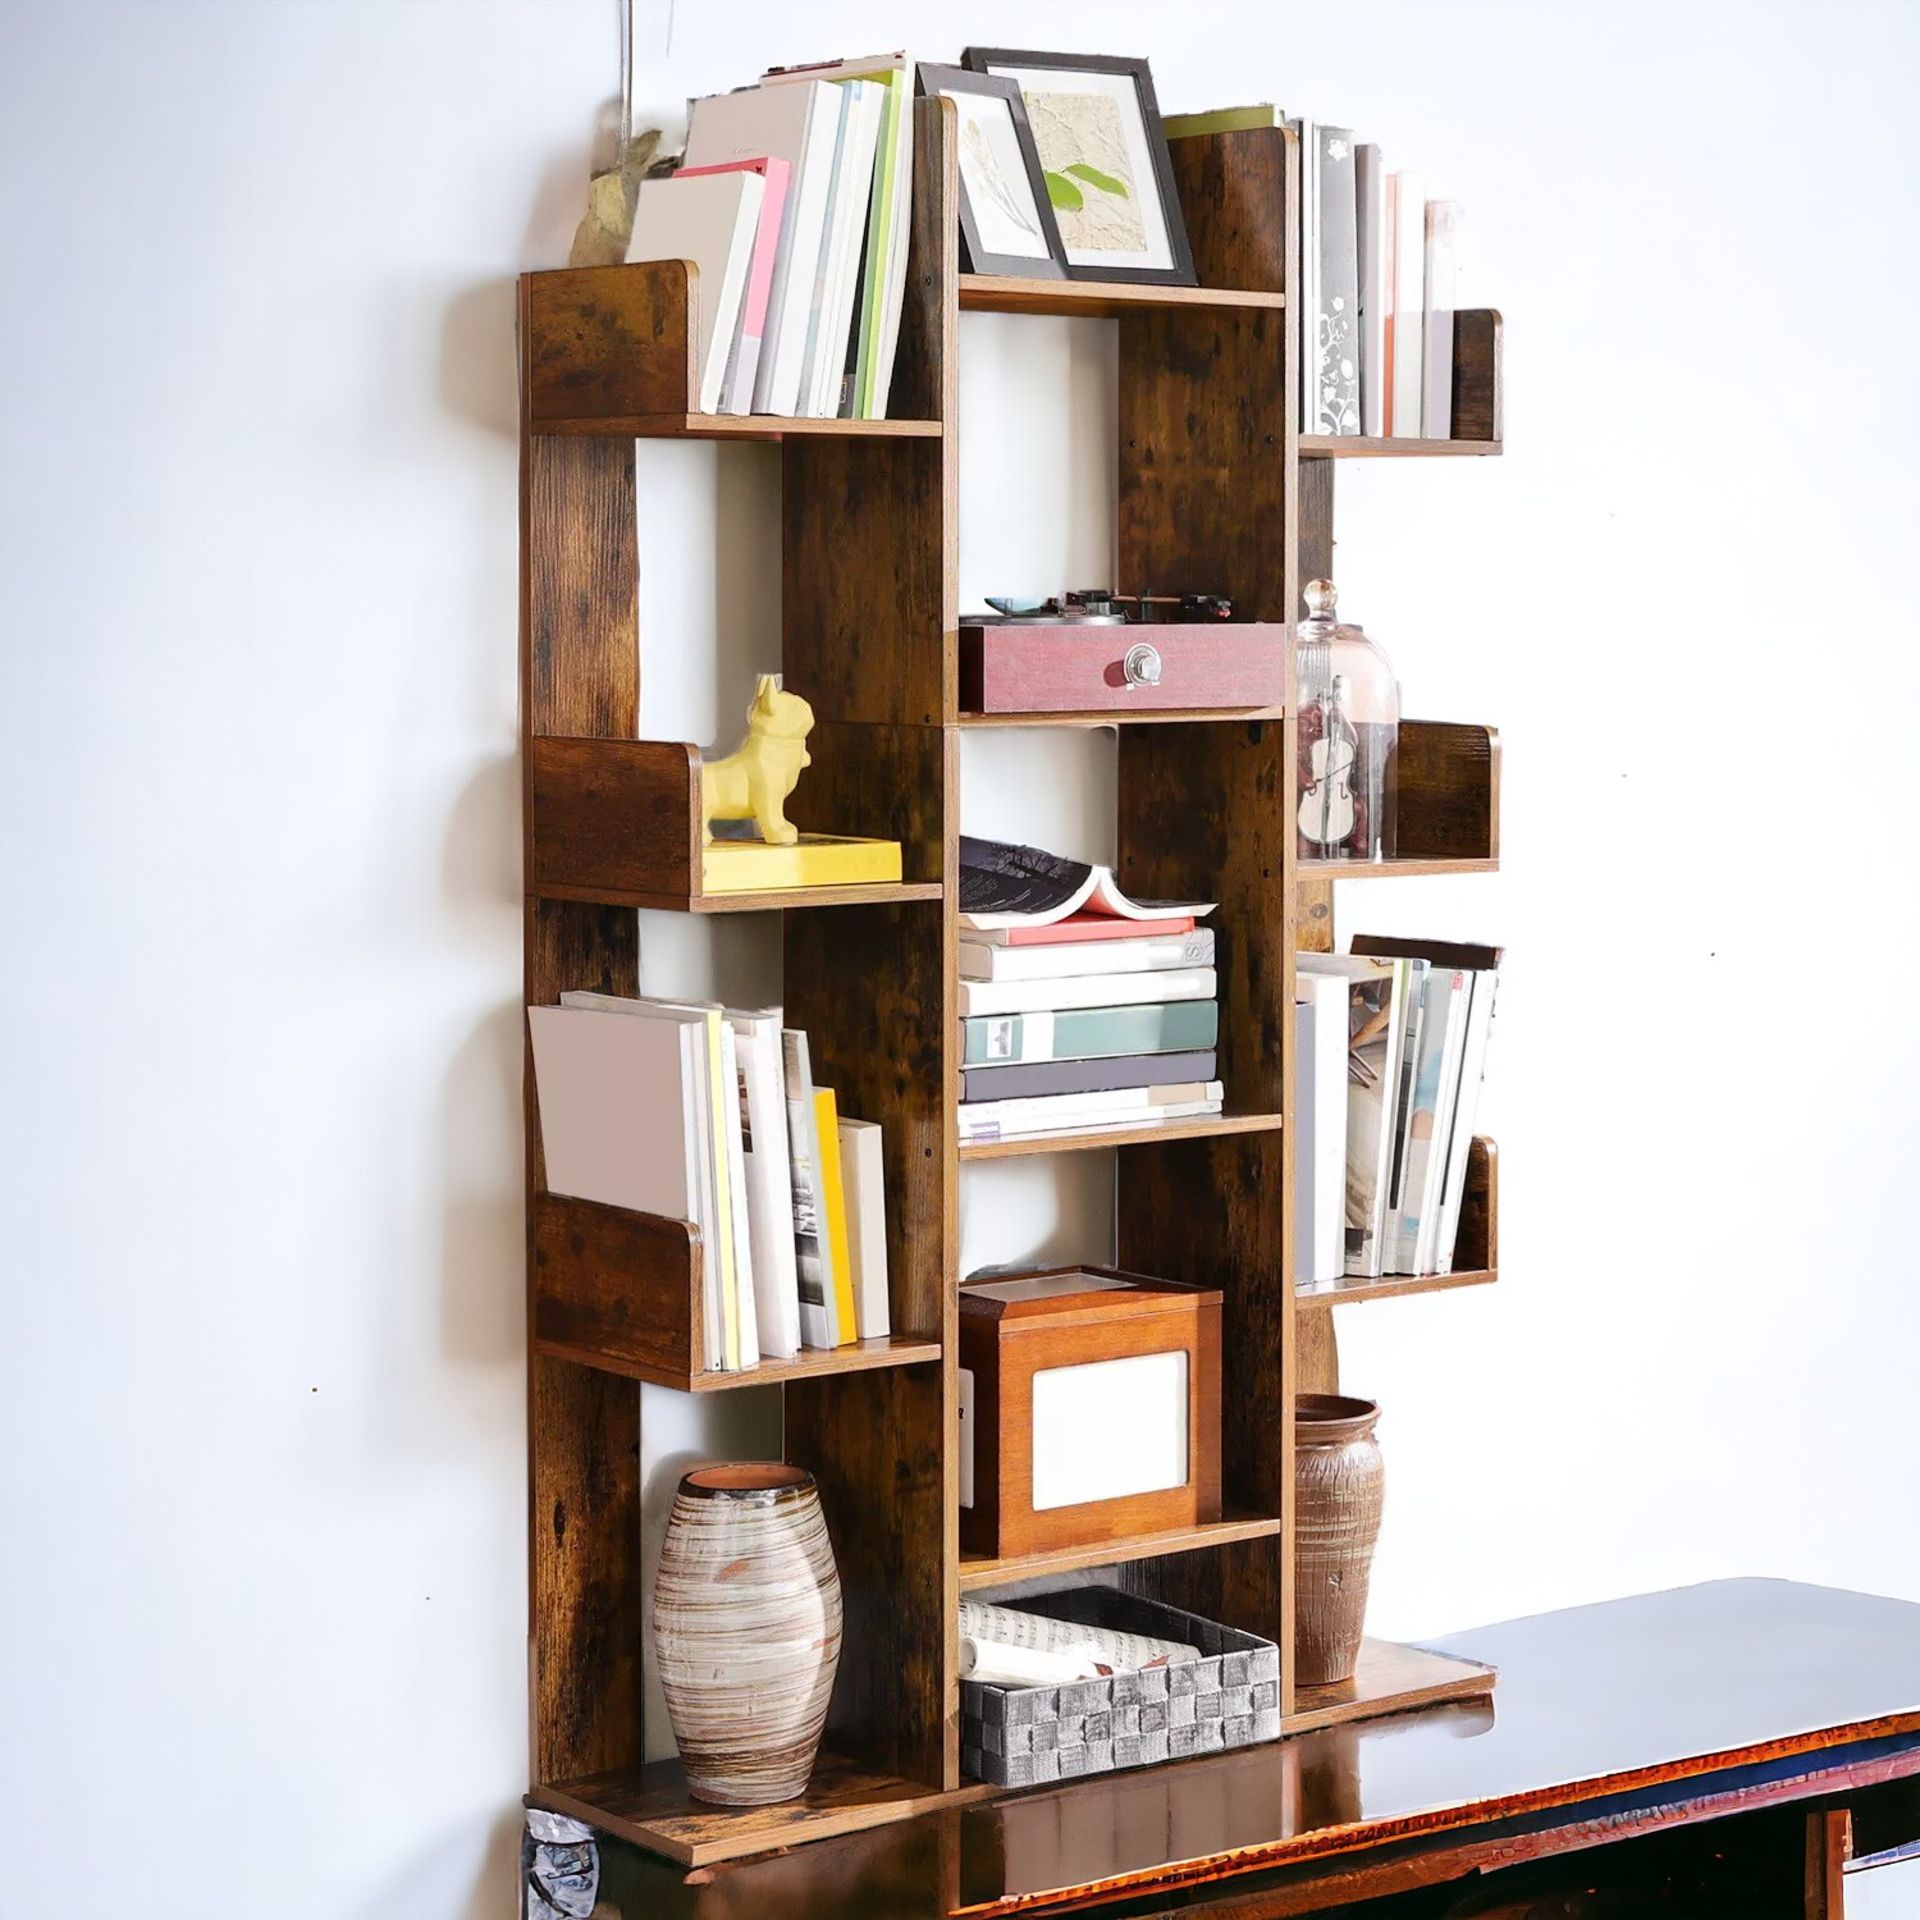 FREE DELIVERY - BRAND NEW BOOKSHELF TREE-SHAPED BOOKCASE 13 STORAGE SHELVES ROUNDED - Image 2 of 2